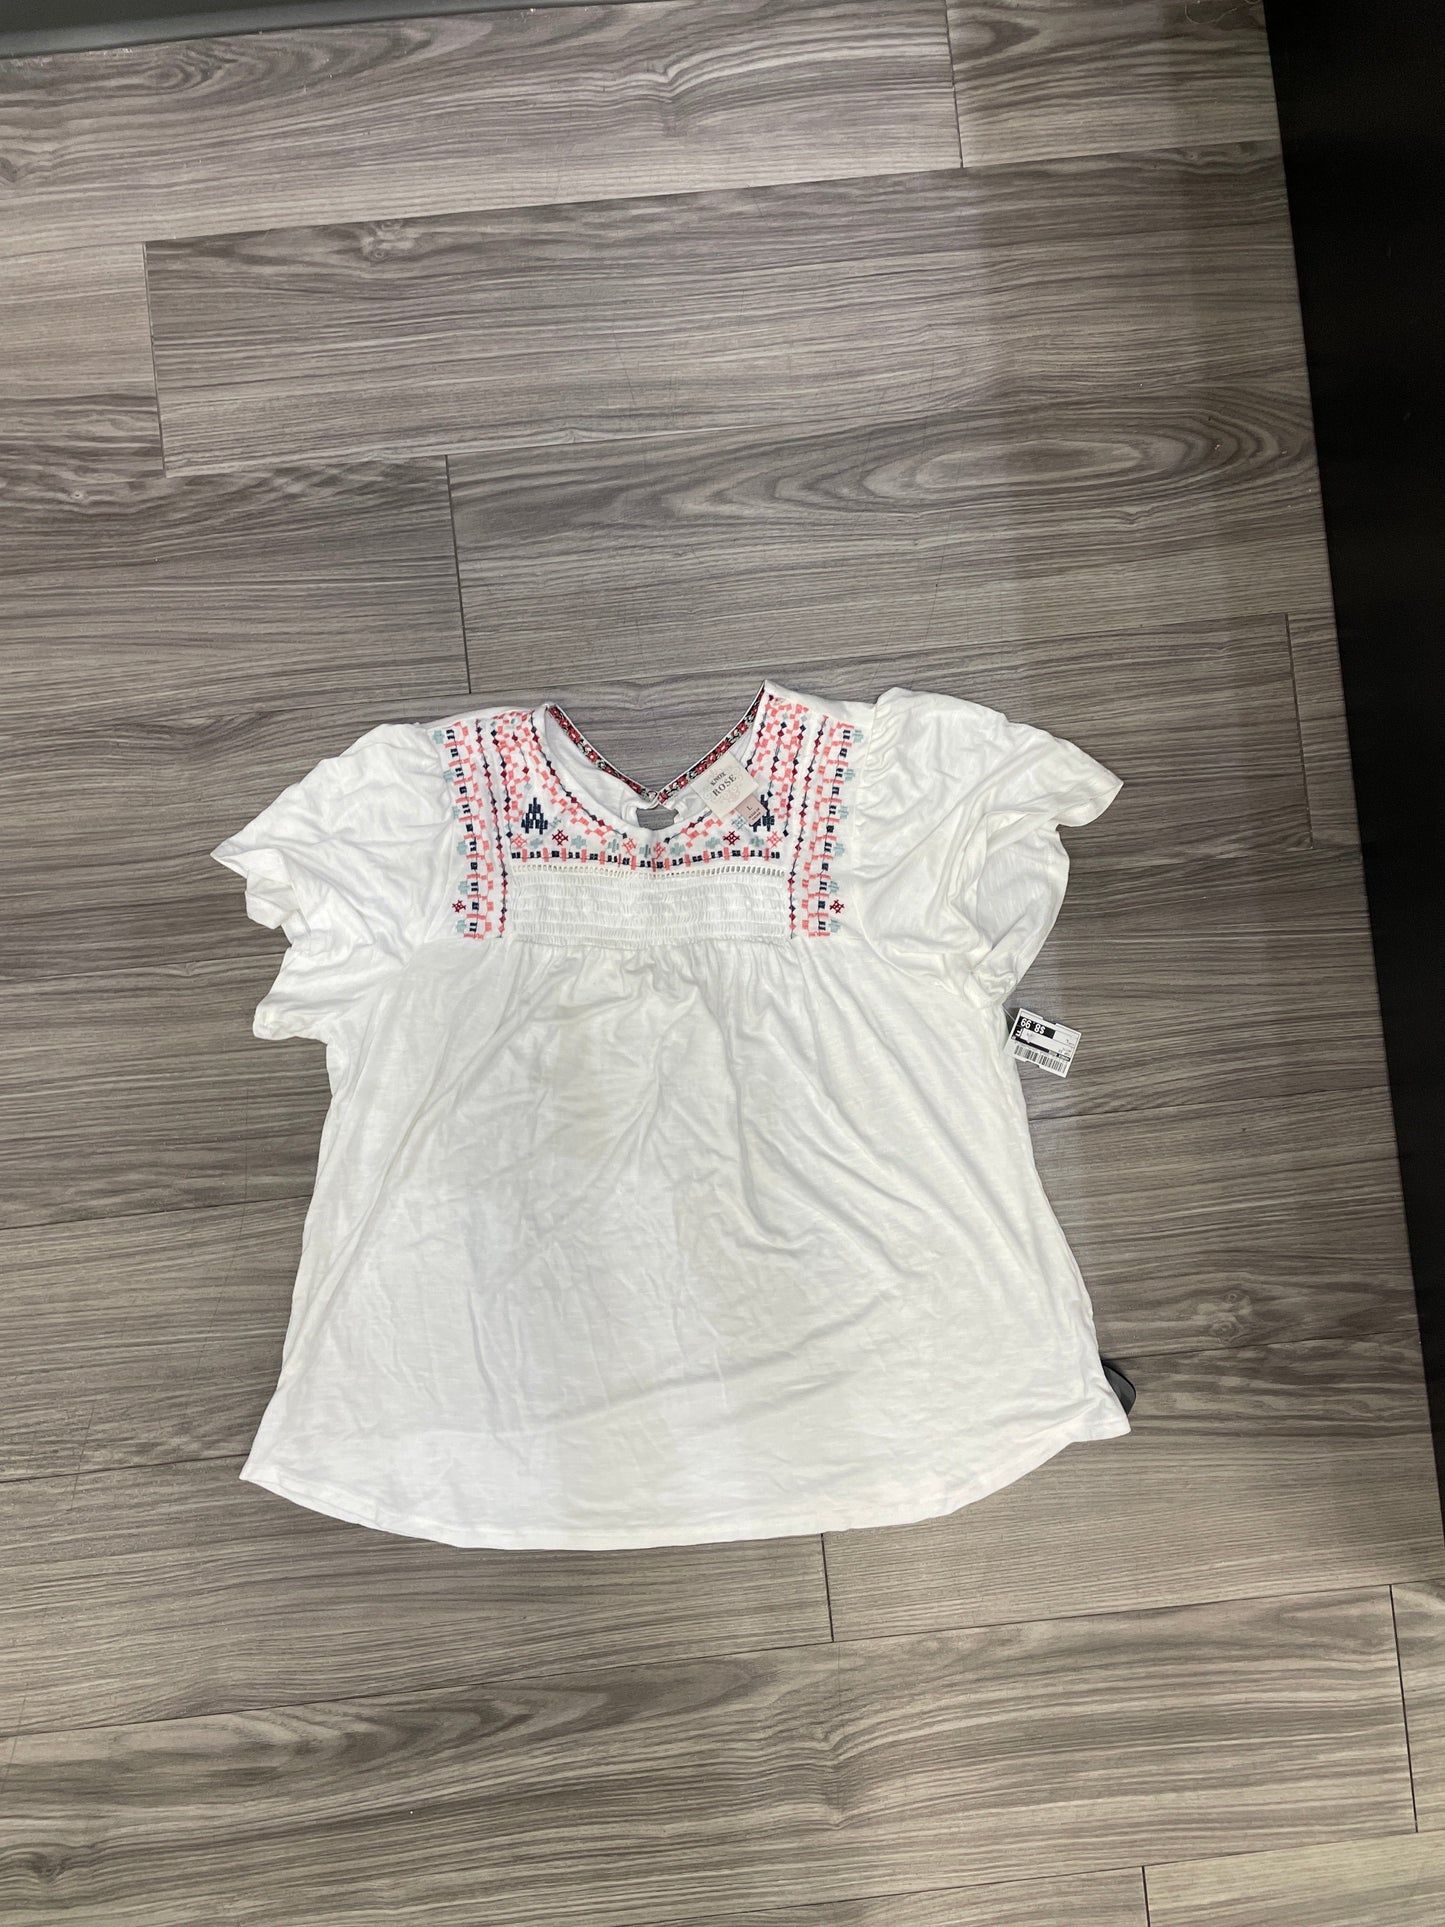 White Top Short Sleeve Knox Rose, Size L